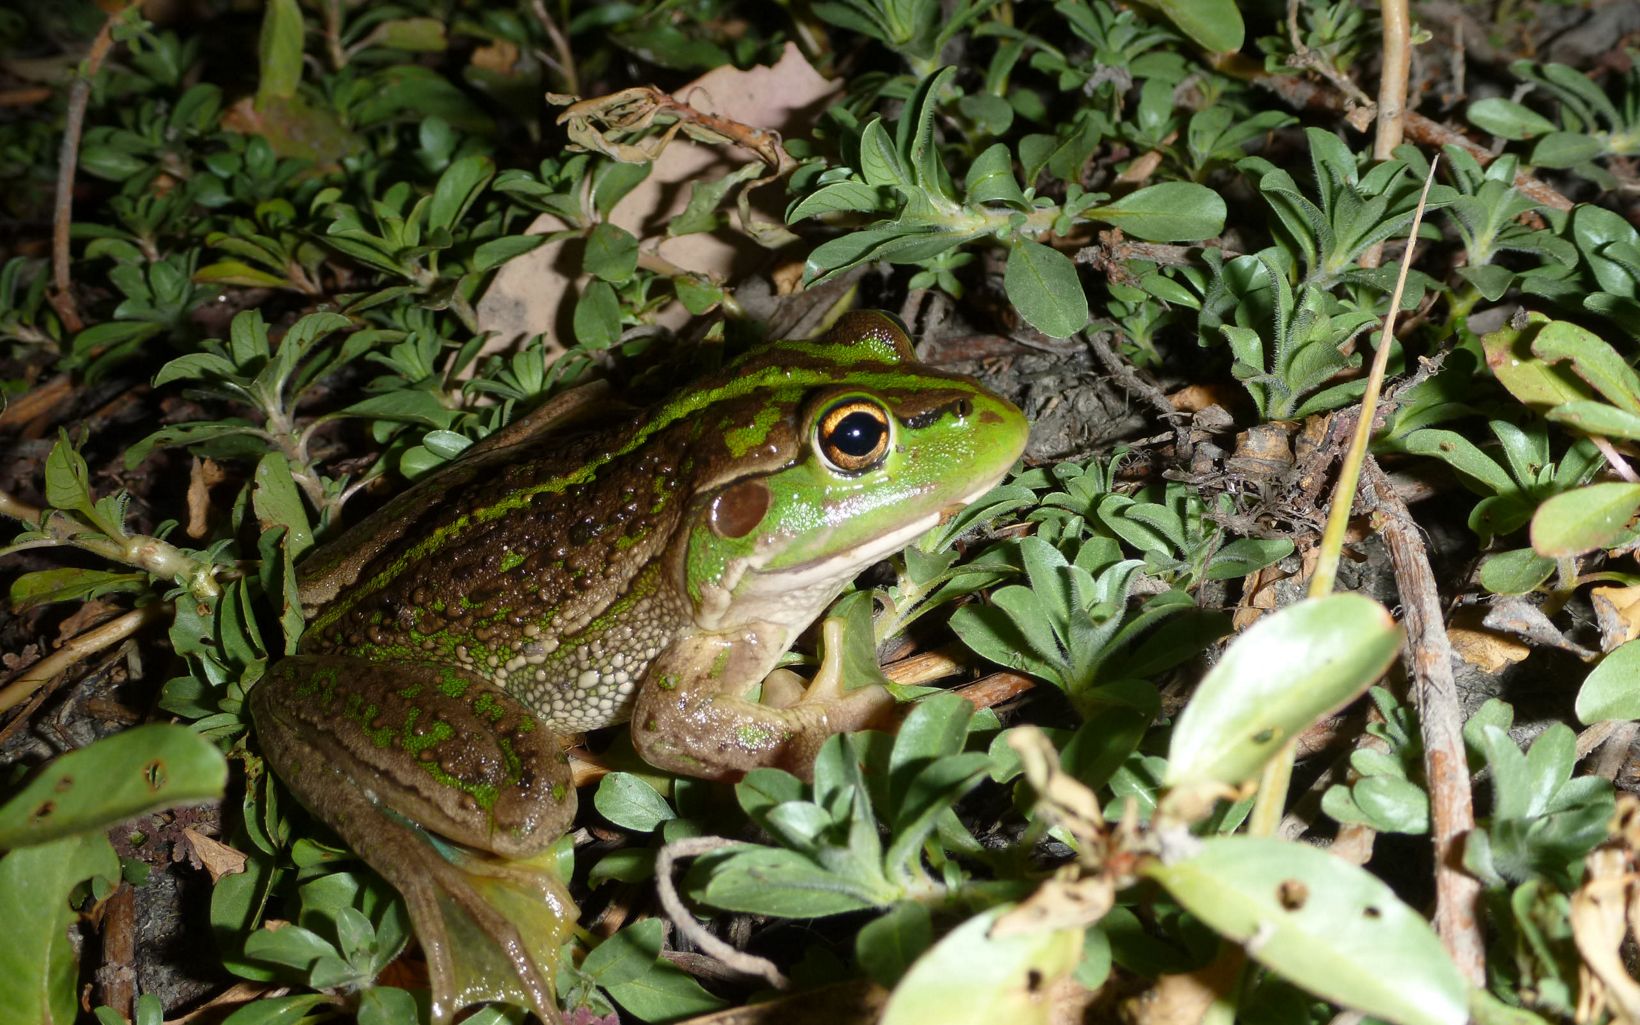 is one of the largest frog species in Australia.